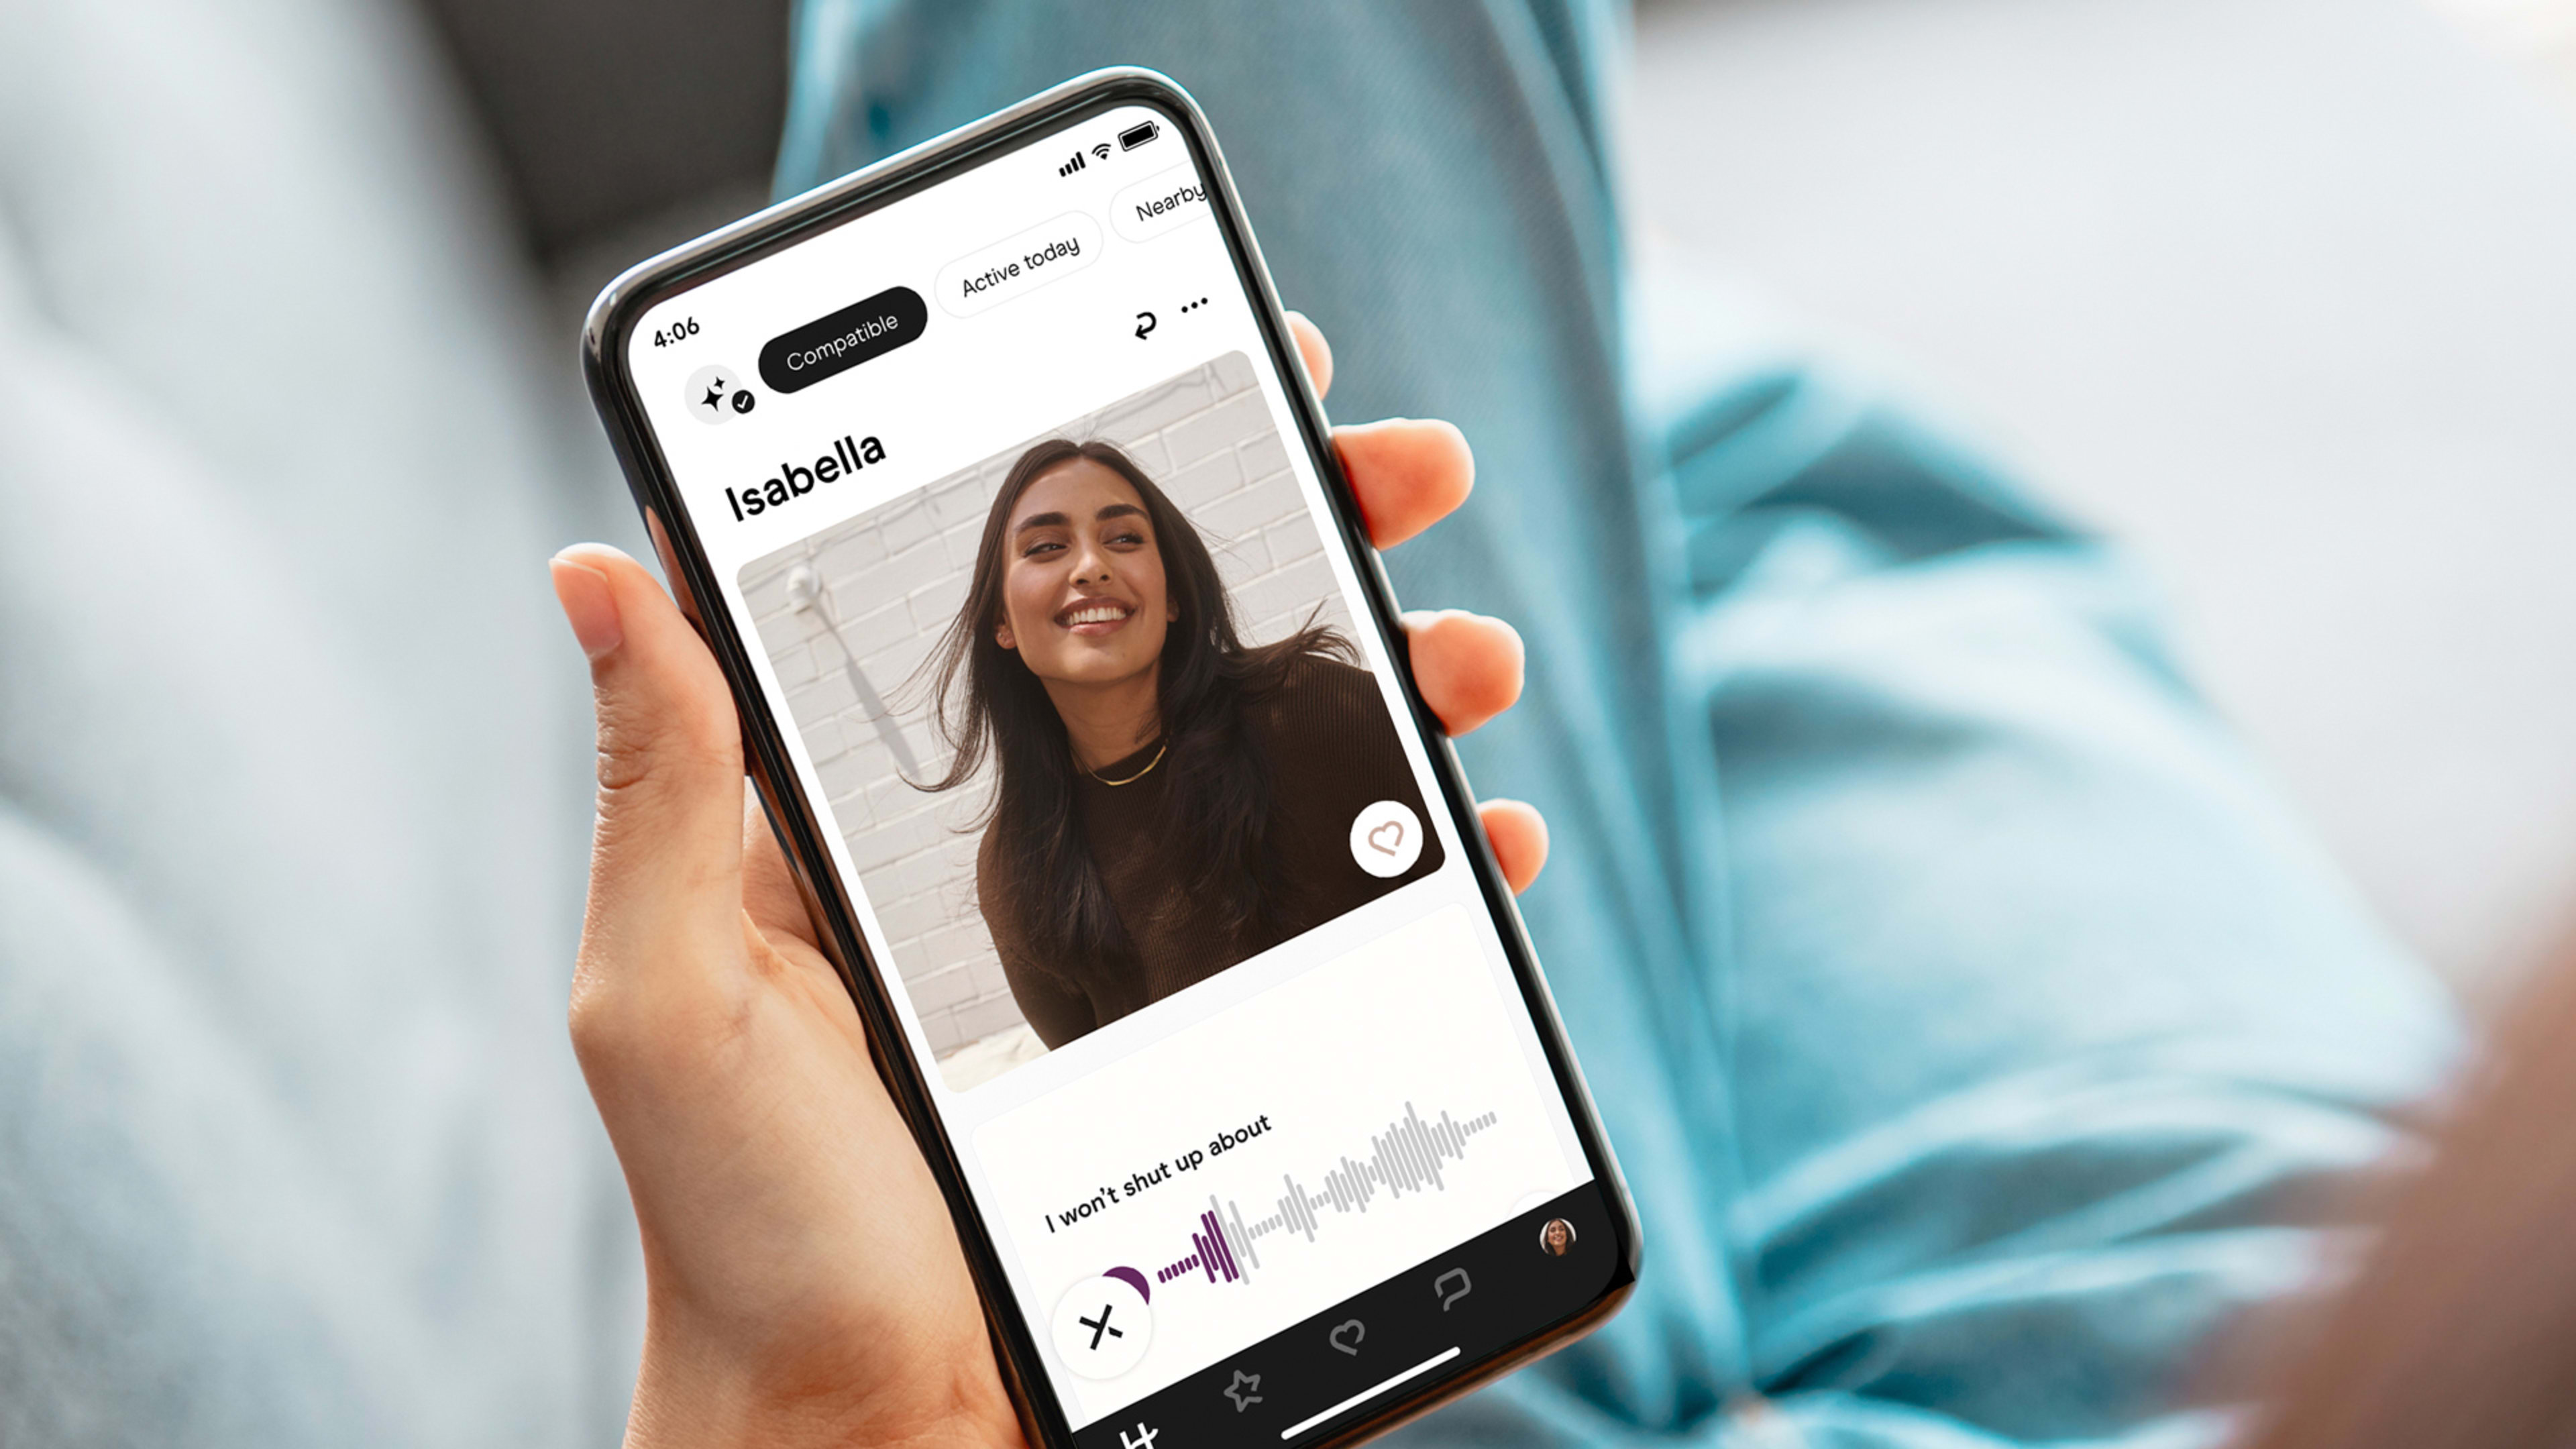 Hinge is rolling out its $50 per month subscription on Thursday